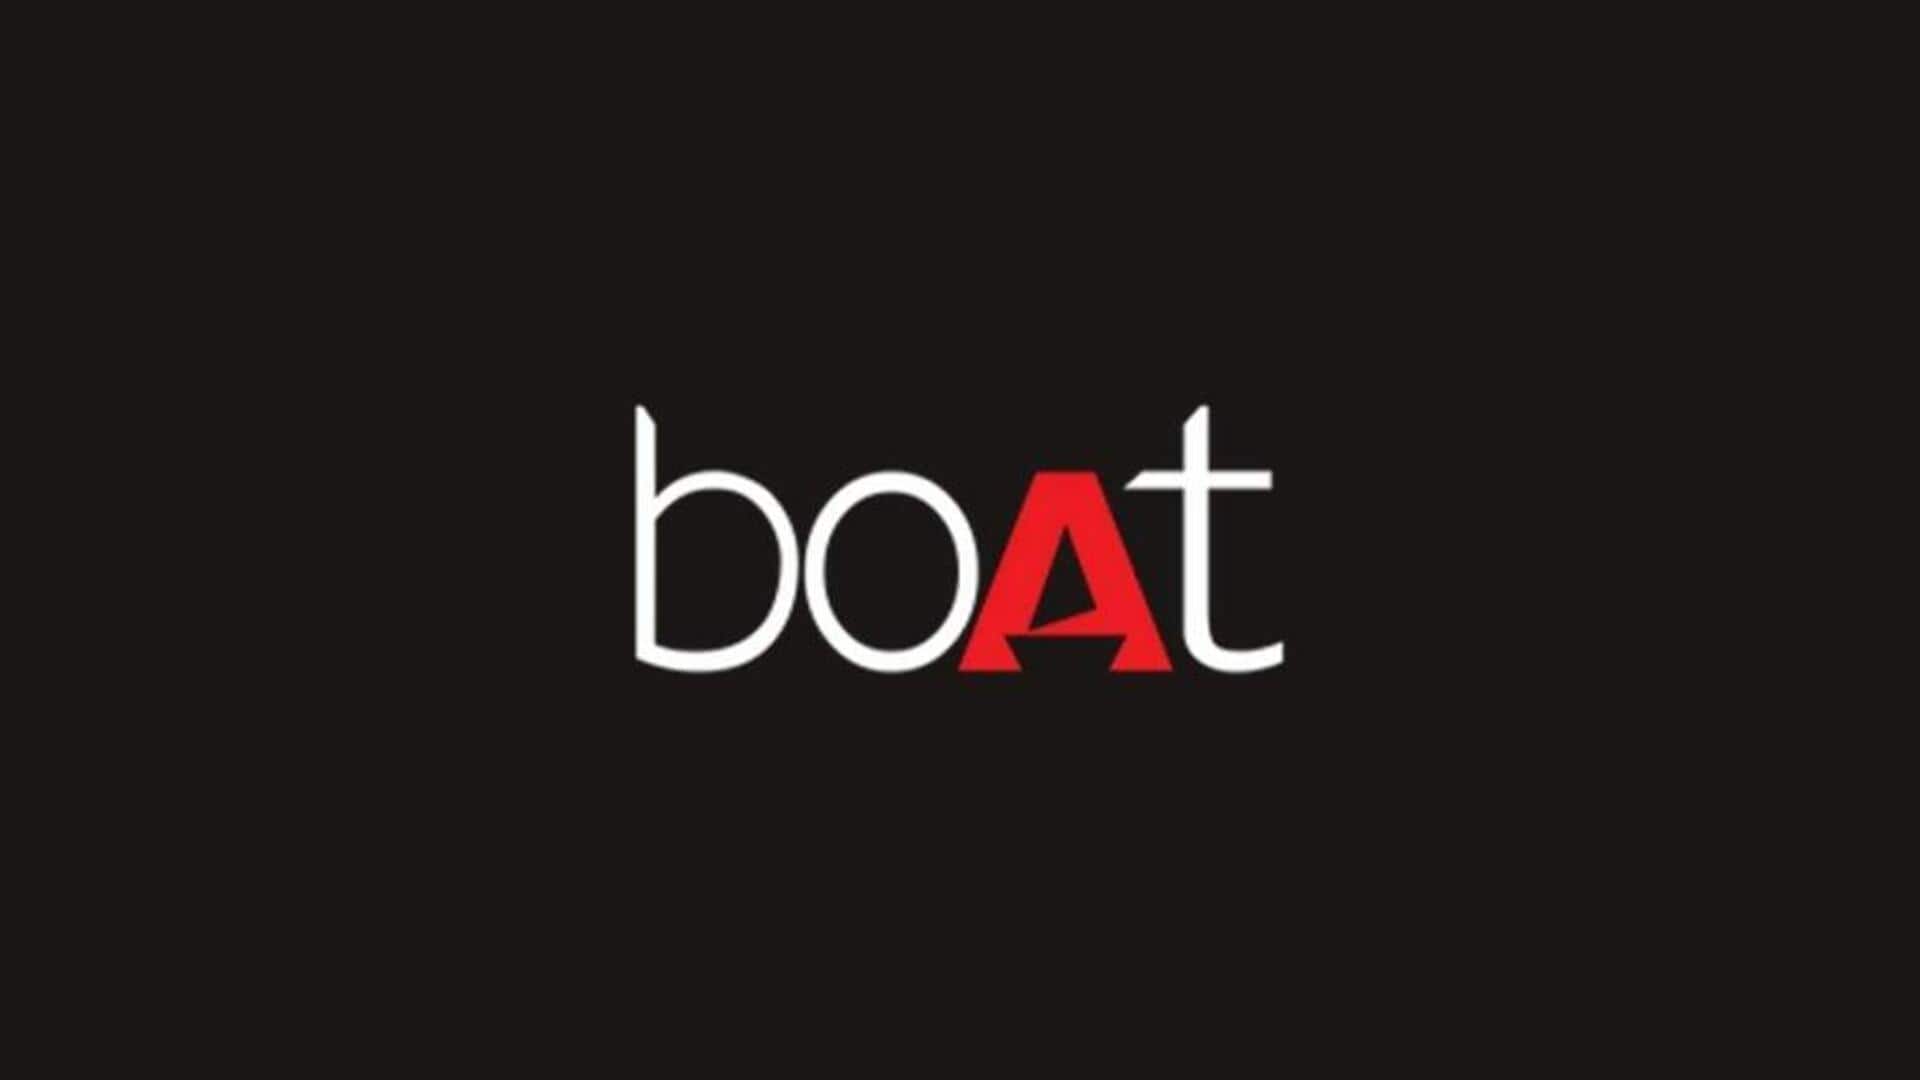 Major data breach hits boAt, 7.5 million customers affected